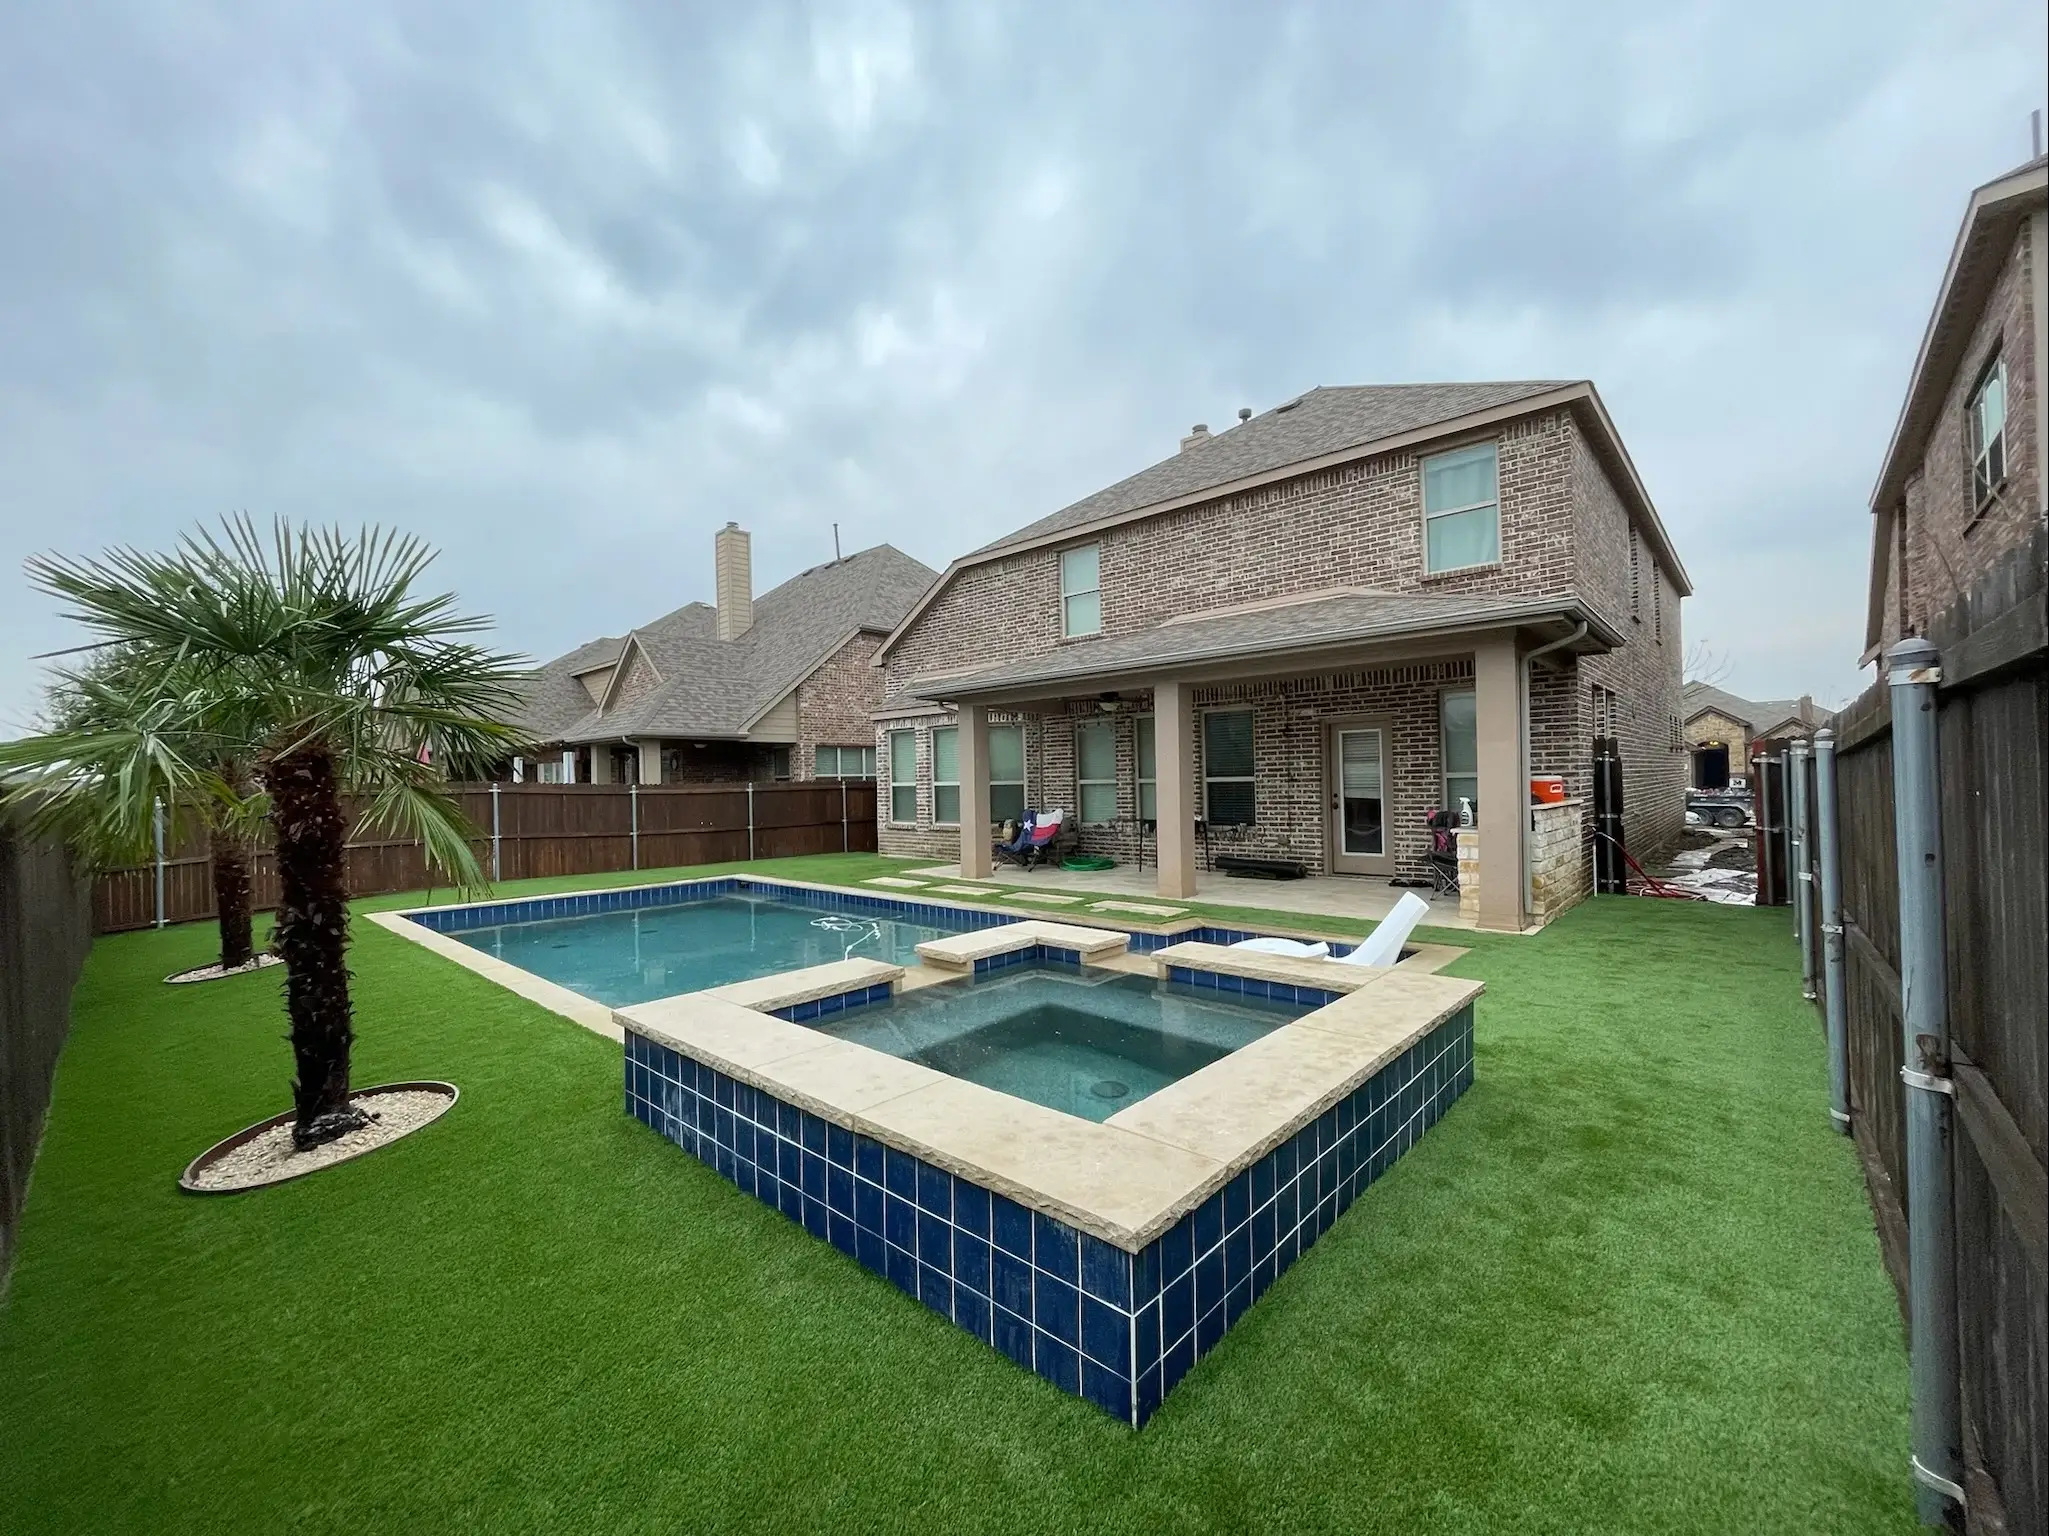 A backyard scene of a suburban home featuring a well-maintained, artificial turf lawn. In the center is a rectangular swimming pool lined with blue tiles and surrounded by a stone deck. Two palm trees enhance the landscape, suggesting a comfortable, leisurely outdoor space. The overcast sky above and a glimpse of the neighborhood beyond the wooden fence suggest a tranquil, residential setting.